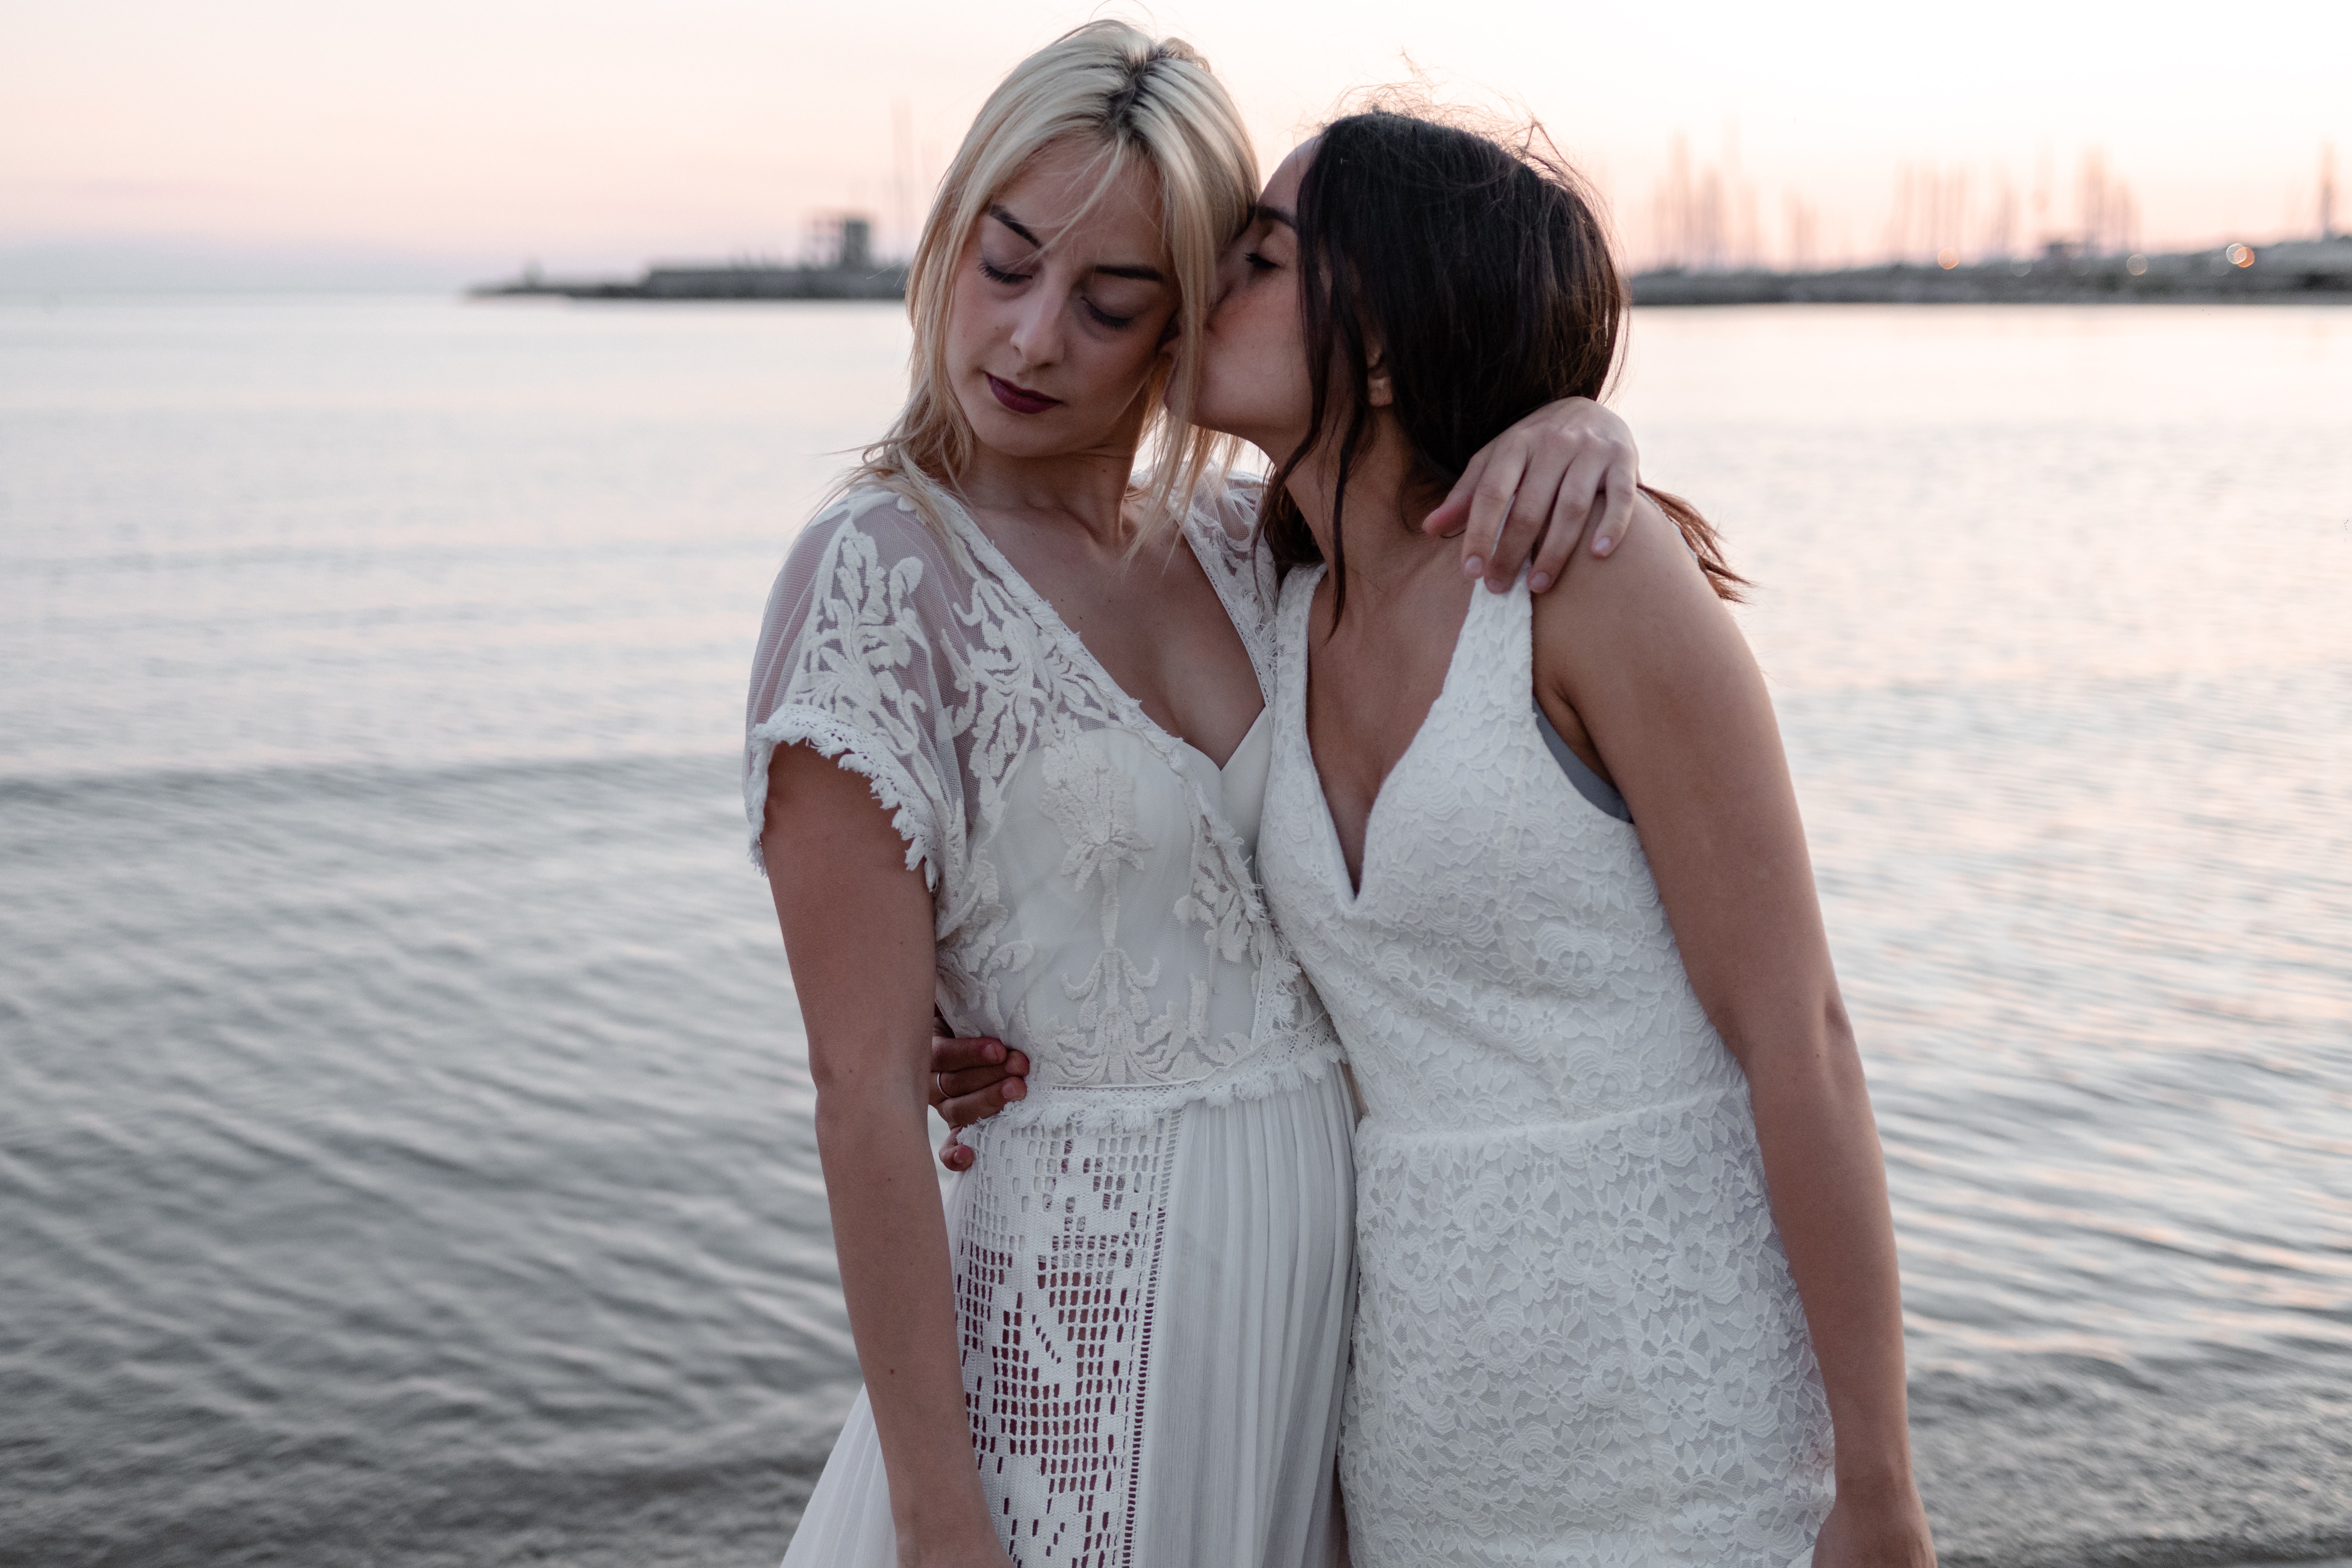 Eloping to Denmark: A Romantic and Inclusive Destination for Same-Sex Couples